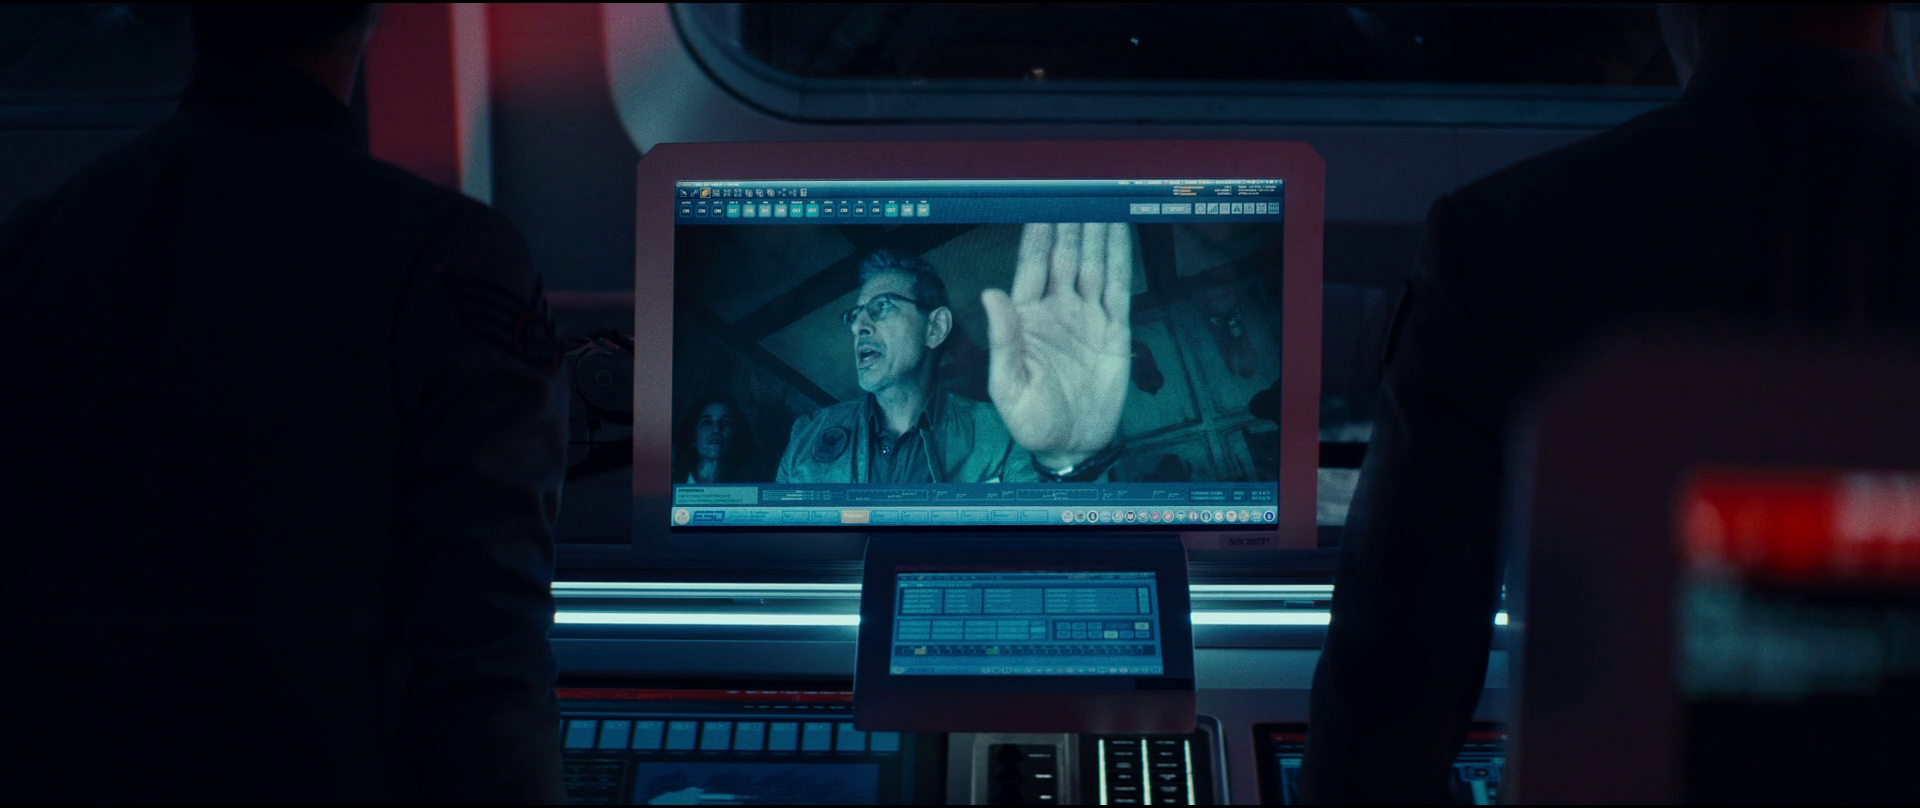 2: Independence.Day.Resurgence.2016.1080p.BluRay.x264.DTS-HD.MA.7.1-FGT 1-6.png